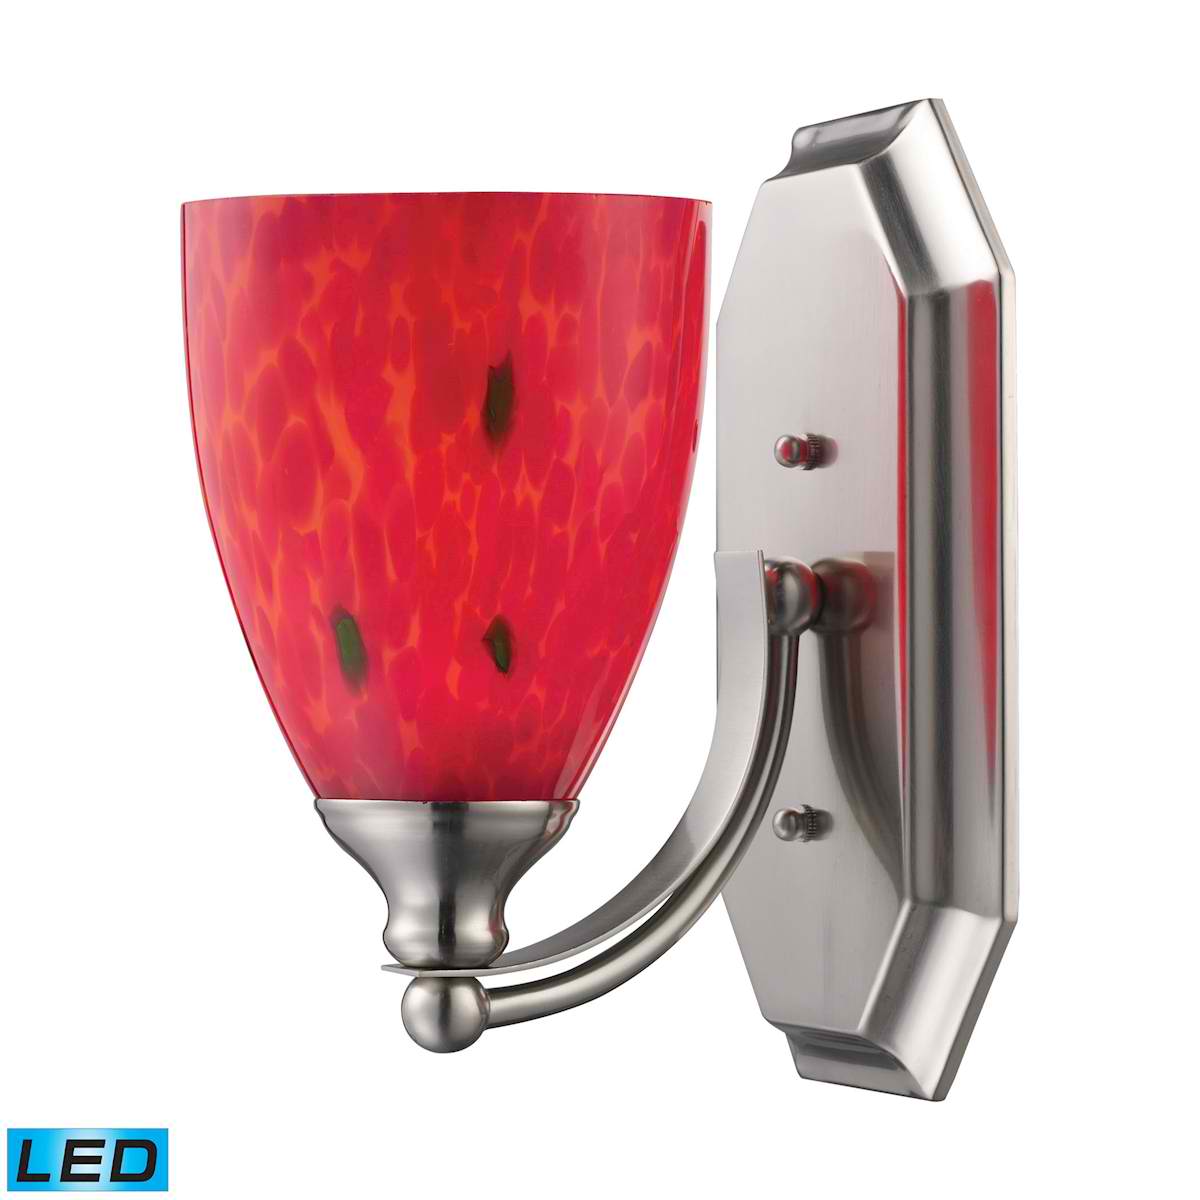 1 Light Vanity in Satin Nickel and Fire Red Glass - LED Offering Up To 800 Lumens (60 Watt Equivalent)